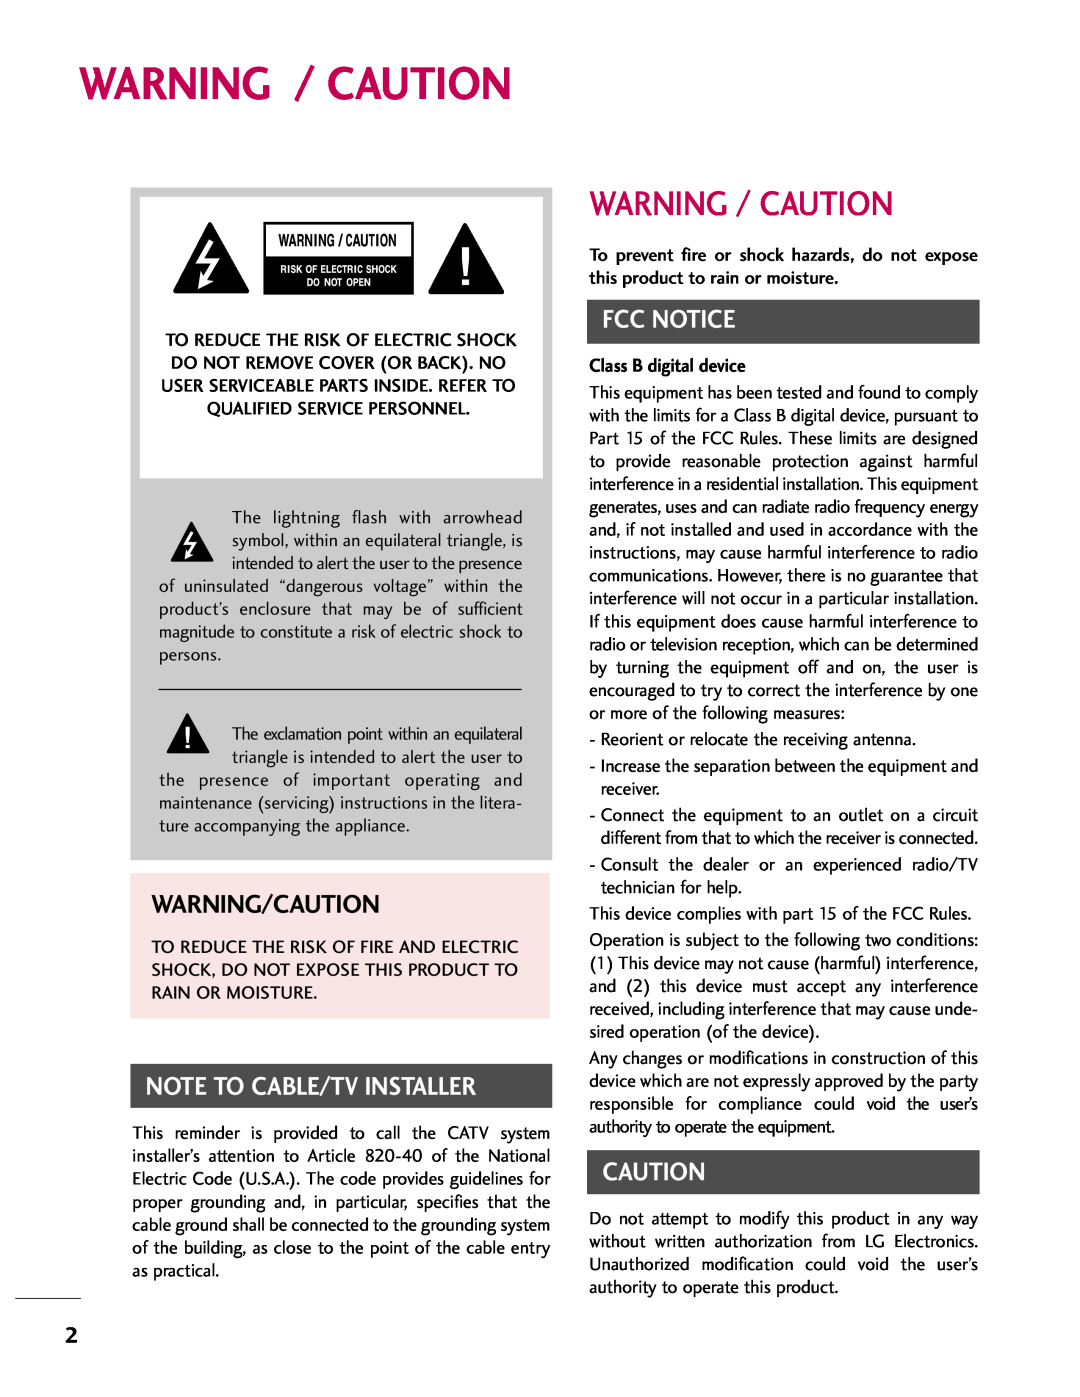 LG Electronics 37LH40 Warning / Caution, Warning/Caution, Class B digital device, Note To Cable/Tv Installer, Fcc Notice 